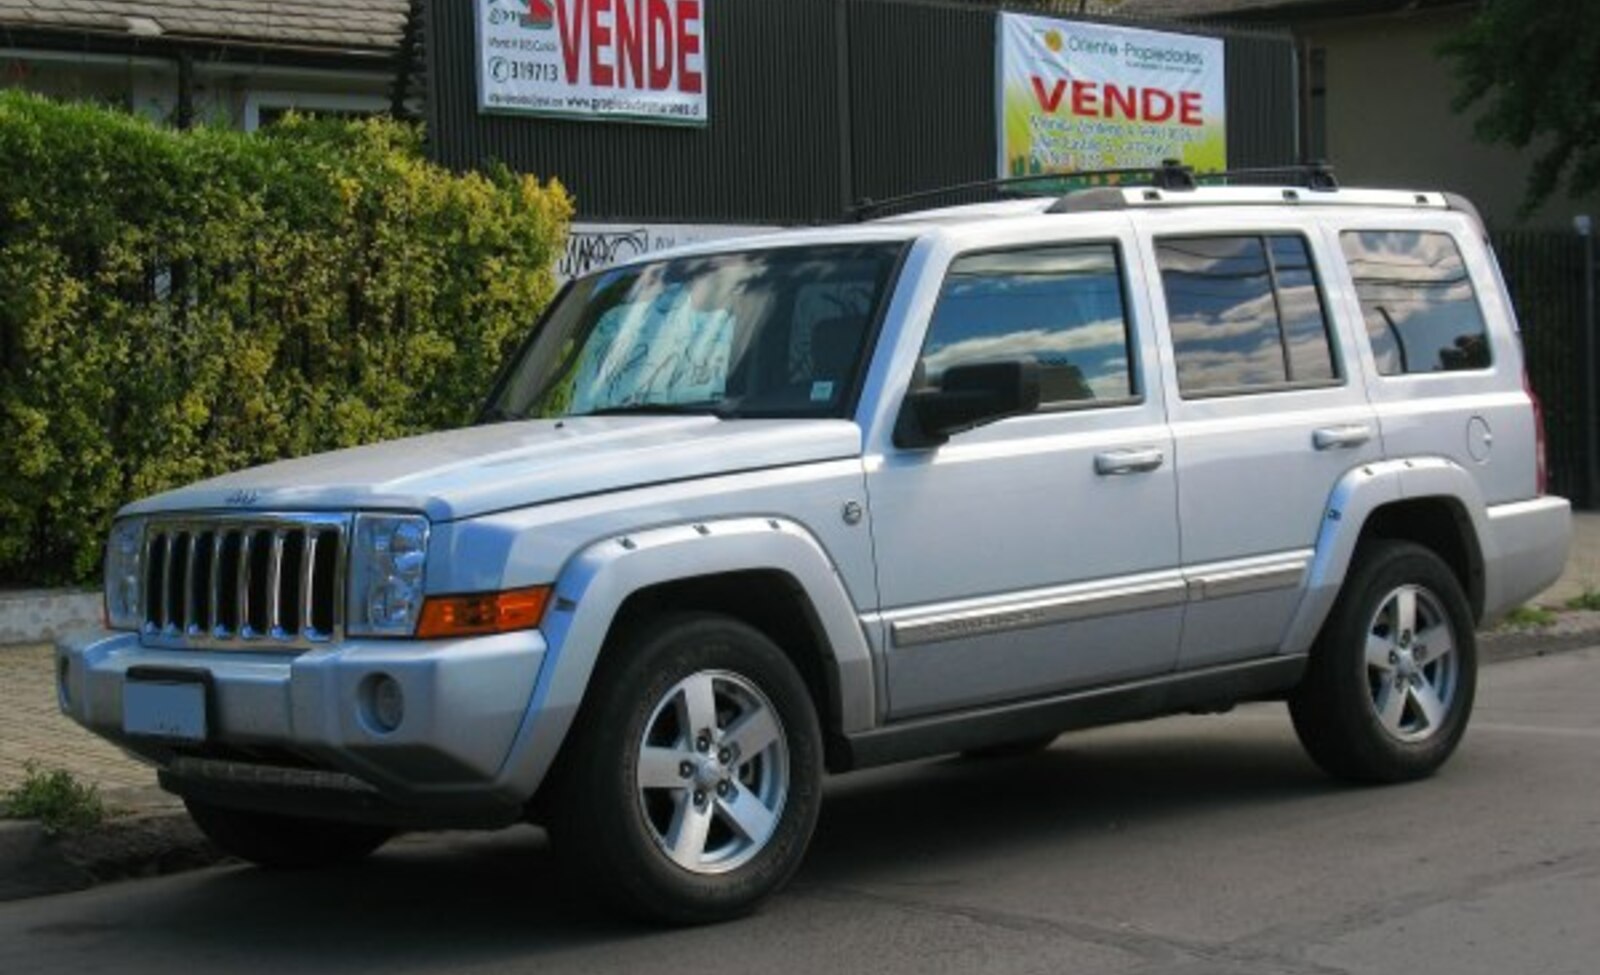 Jeep Commander 4.7 i V8 Limited (231 Hp) 4WD Automatic 2006, 2007, 2008, 2009, 2010